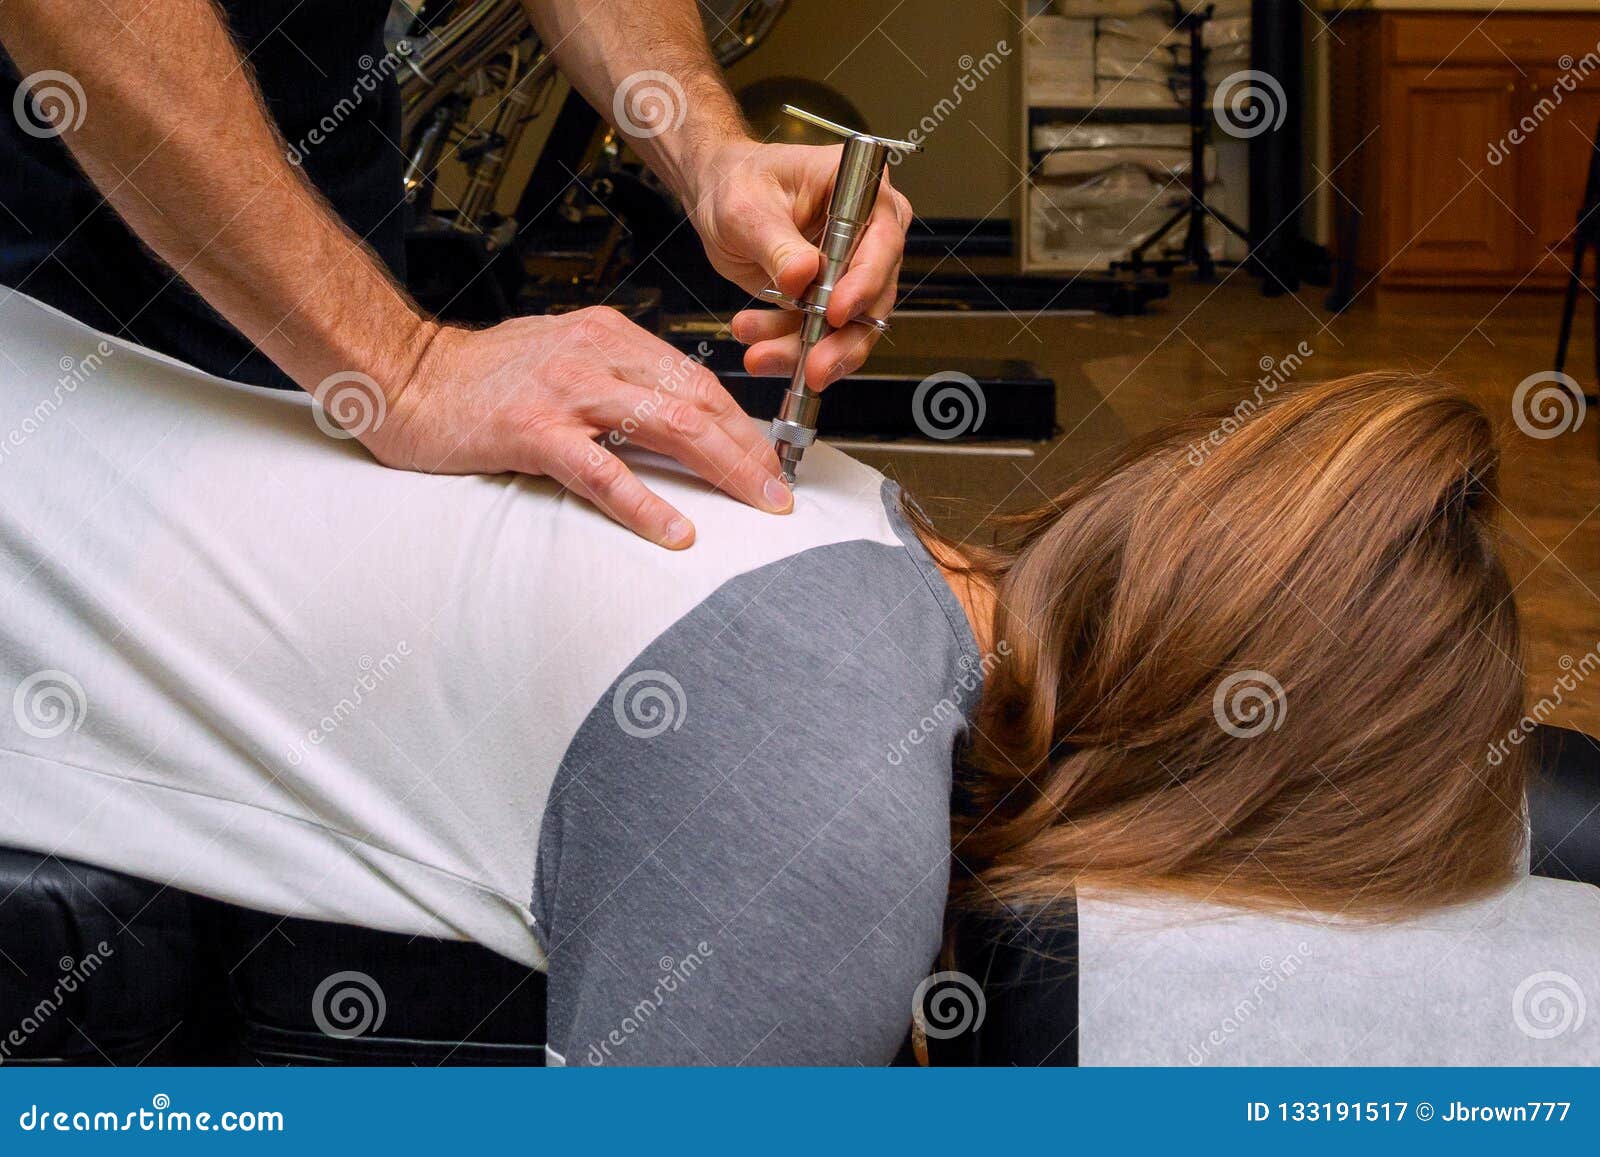 chiropractor uses an integrator on the back of a young girl